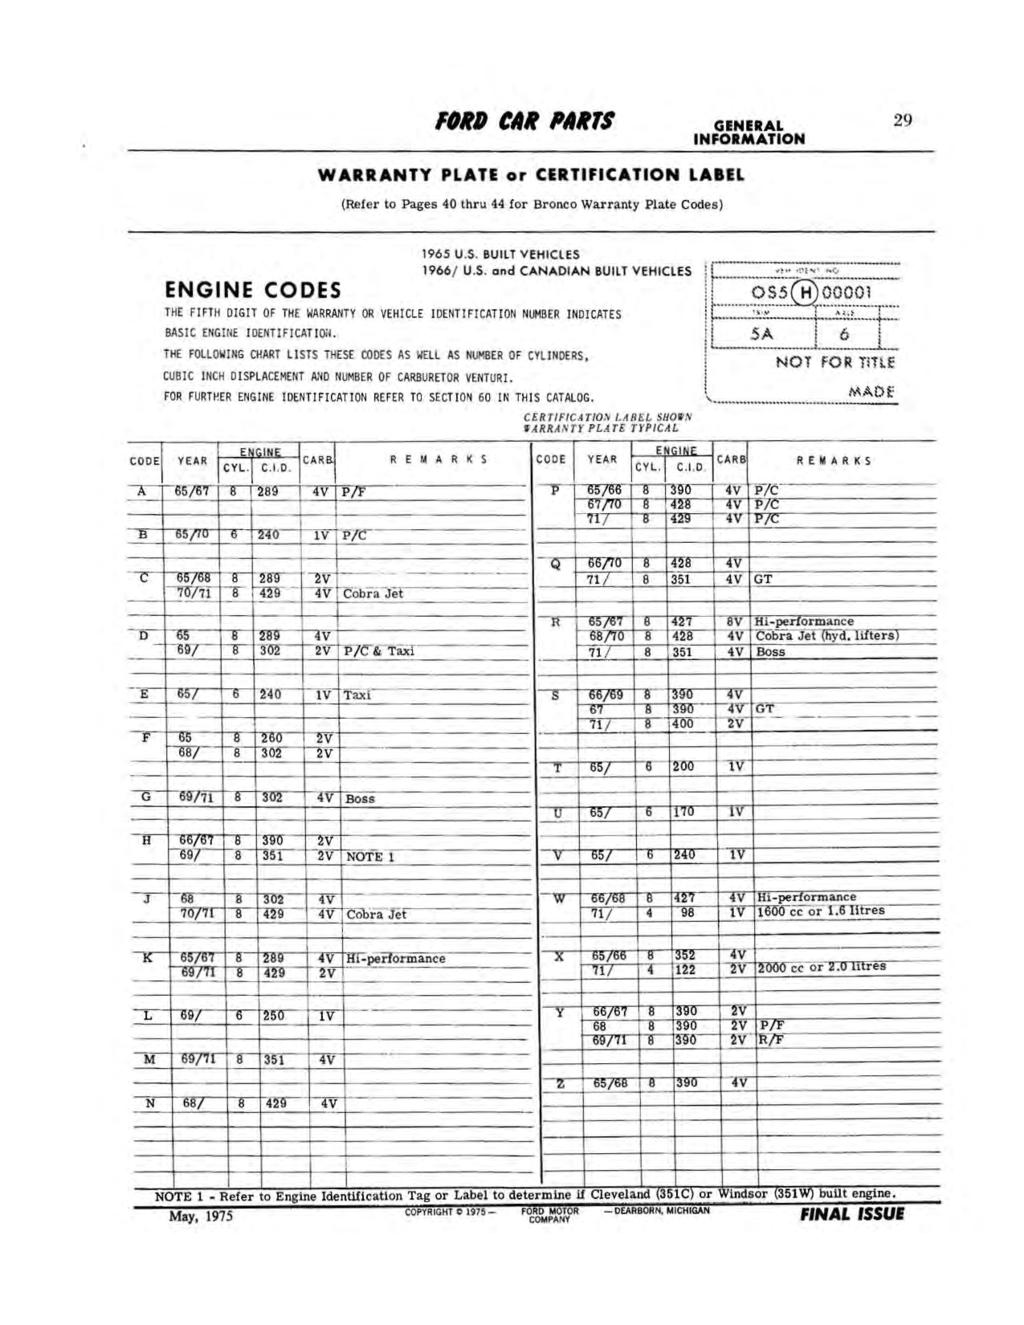 FORD CAR PARTS GENERAL INFORMATION 29 WARRANTY PLATE or CERTIFICATION LABEL (Refer to Pages 40 thru 44 for Bronco Warranty Plate Codes) ENGINE CODES 1965 U.S. BUILT VEHICLES 1966/ U.S. and CANADIAN BUILT VEHICLES THE FIFTH DIGIT OF THE WARRANTY OR VEHICLE IDENTIFICATION NUMBER INDICATES BASIC ENGINE IDENTIFICATION.